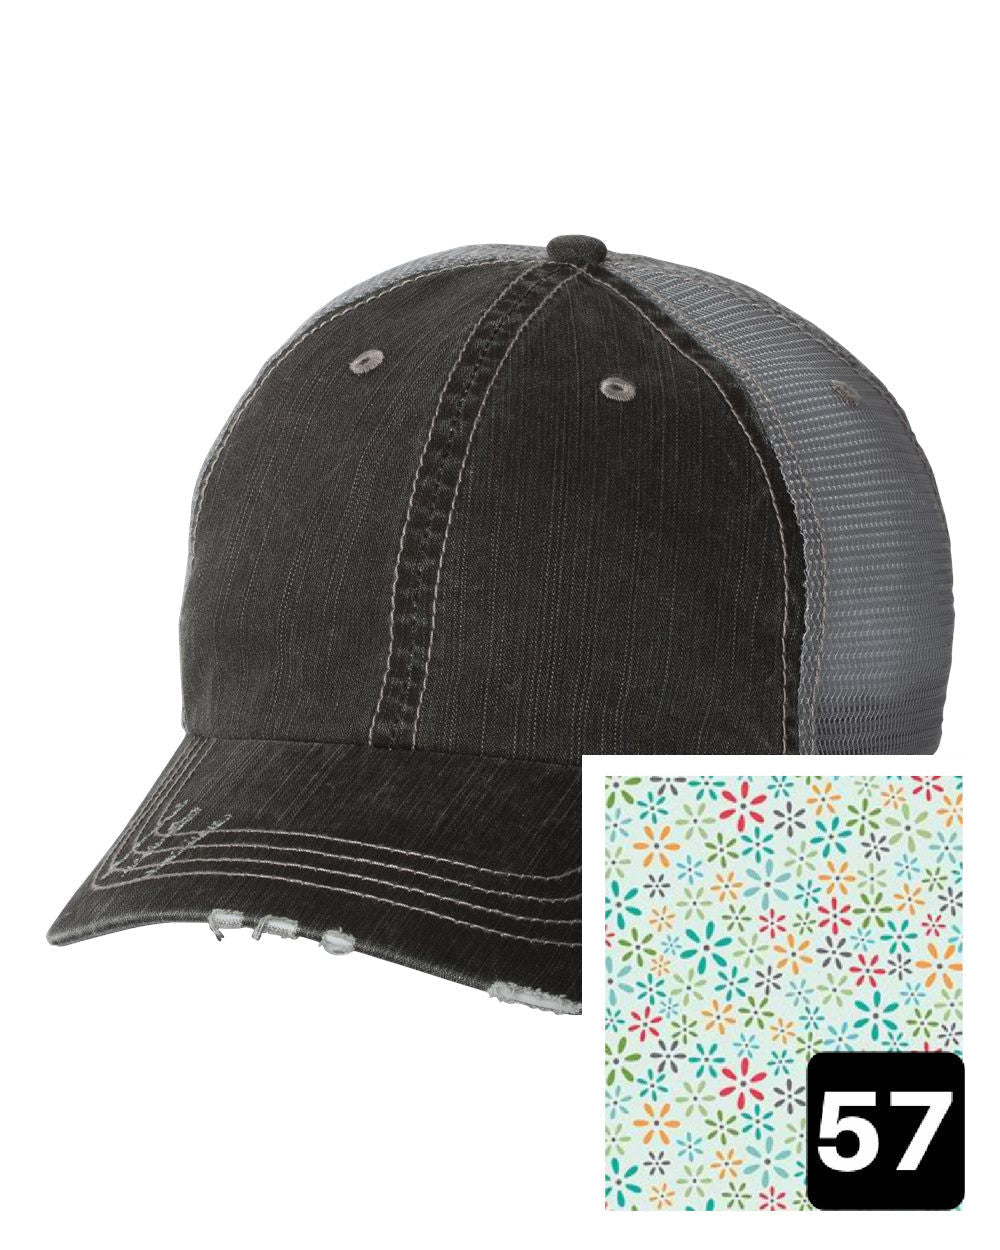 gray distressed trucker hat with white daisy on yellow fabric state of Illinois